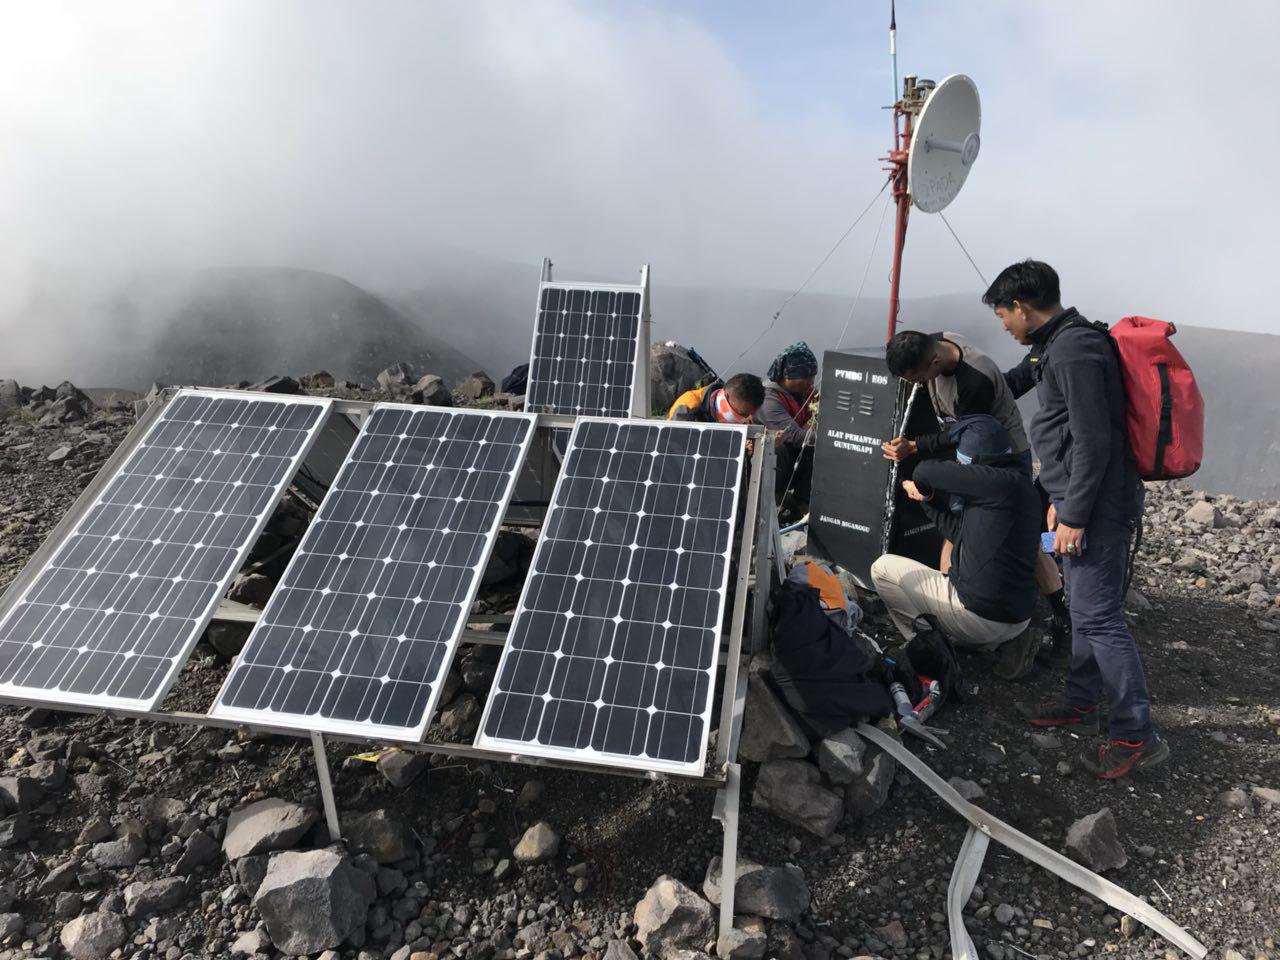 CGO staff and their collaborators from Indonesia’s CVGHM servicing a volcano observation station located 2,470 metres above sea level on the summit of Mount Marapi, Sumatra, Indonesia (Source: Leong Choong Yew/Earth Observatory of Singapore)